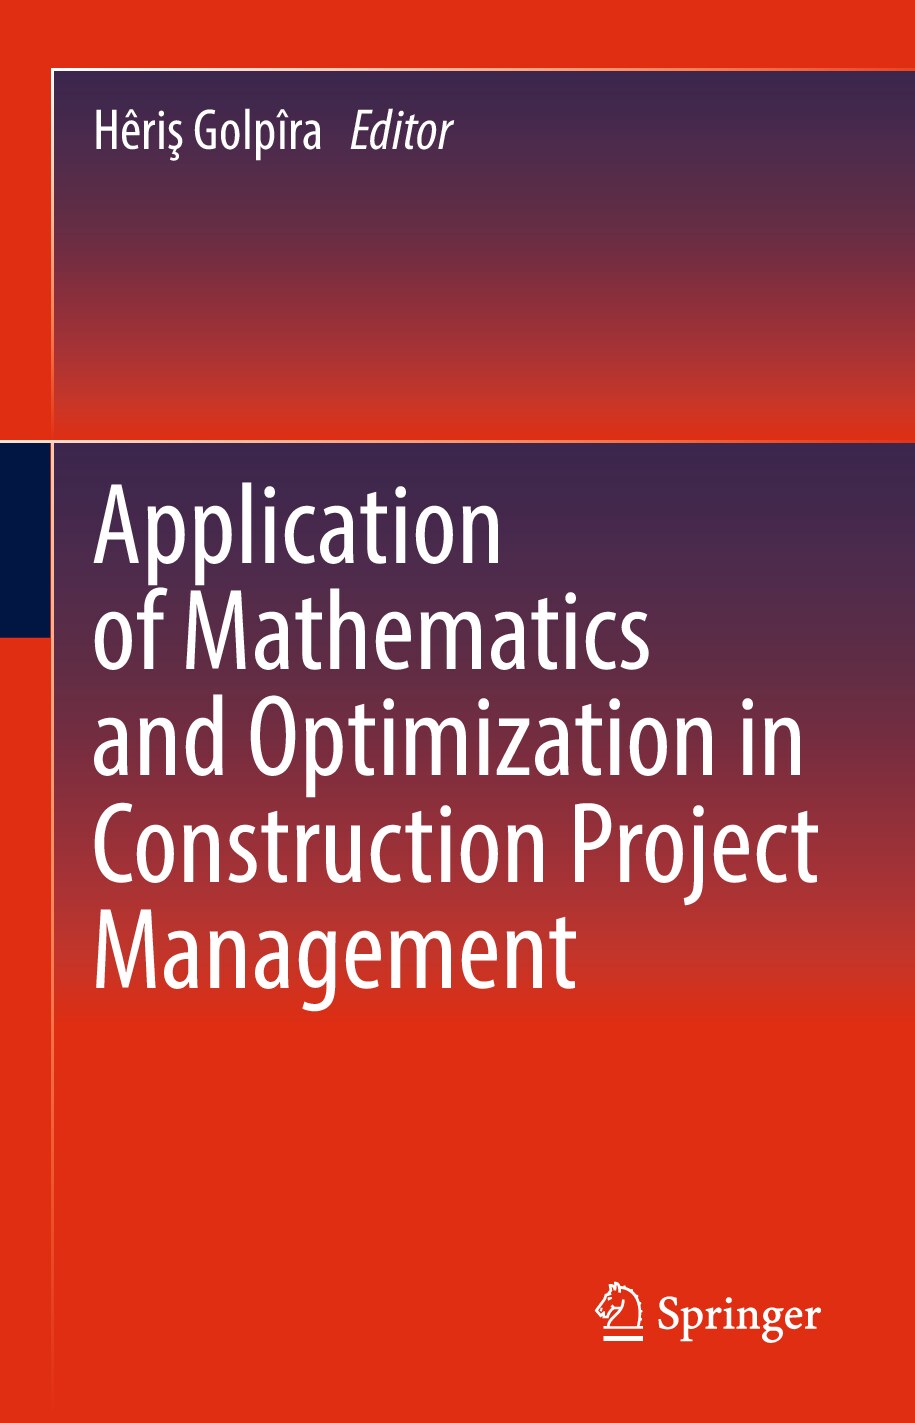 Application of Mathematics and Optimization in Construction Project Management,r (2021)